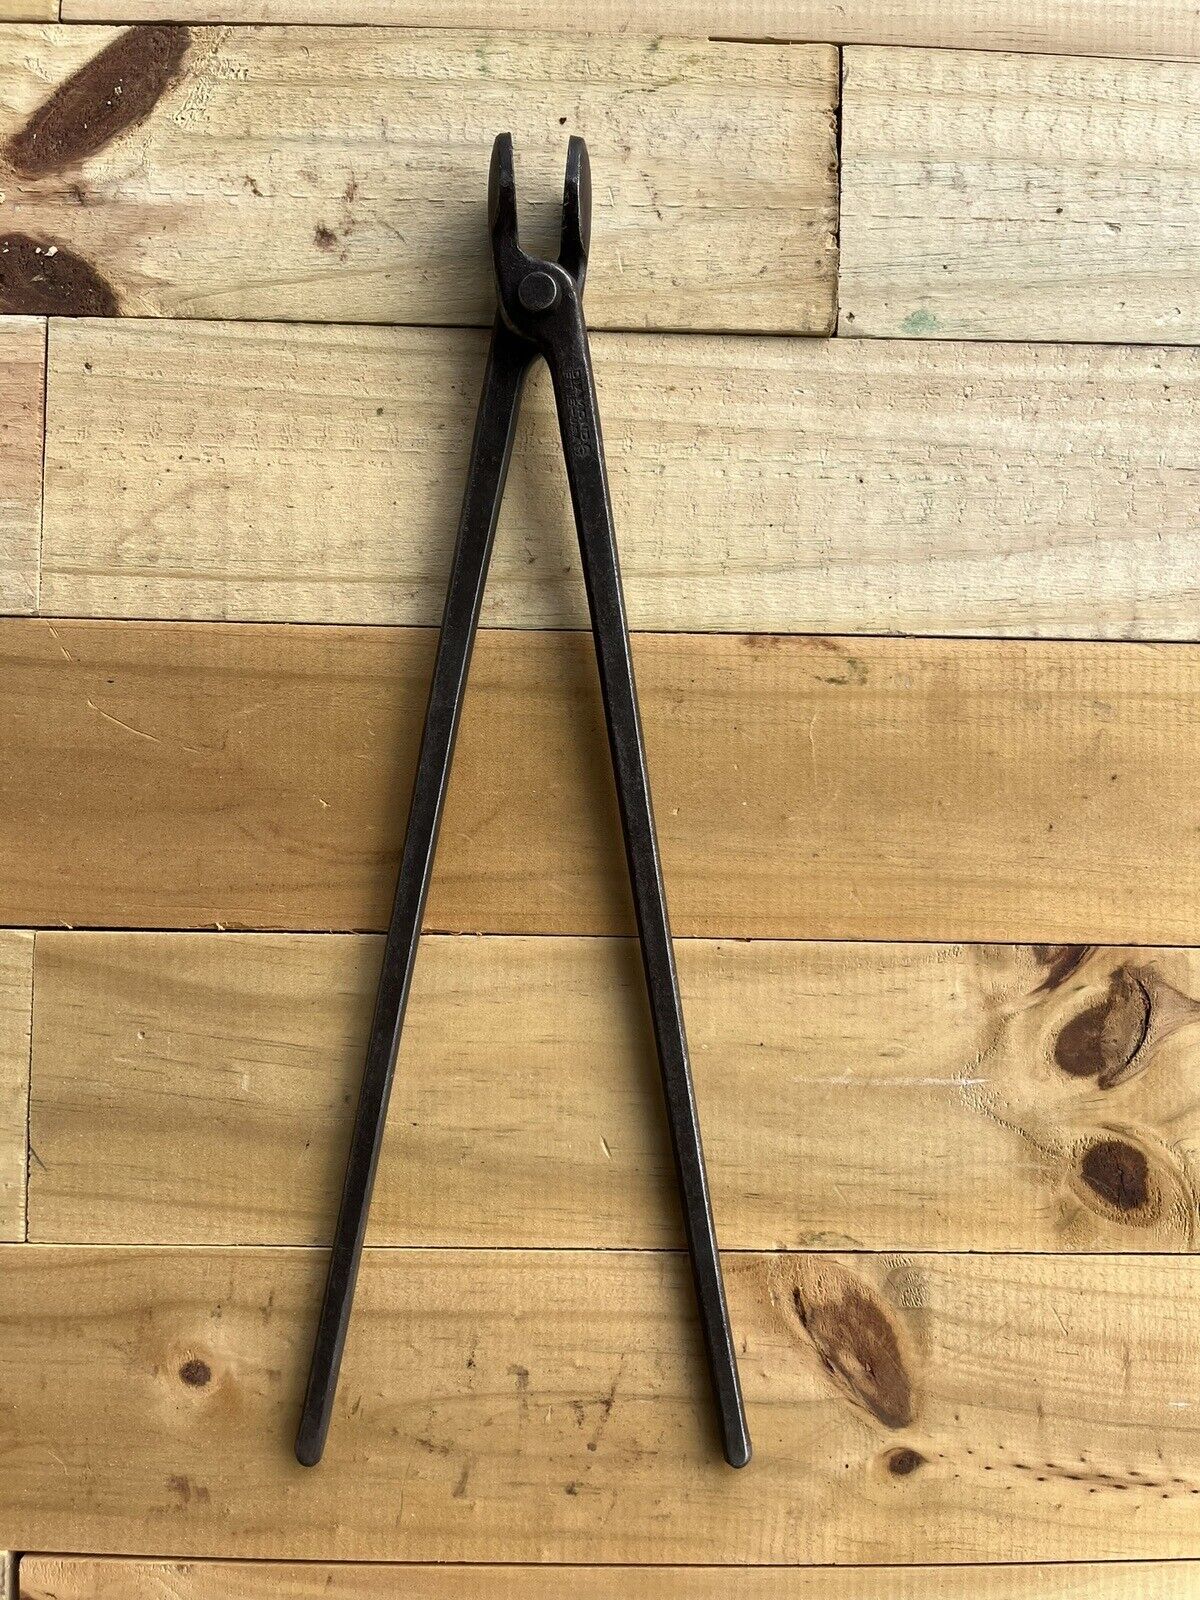 Awesome Vintage Blacksmith Farrier Tongs Diamond 15” FT15 Made in USA